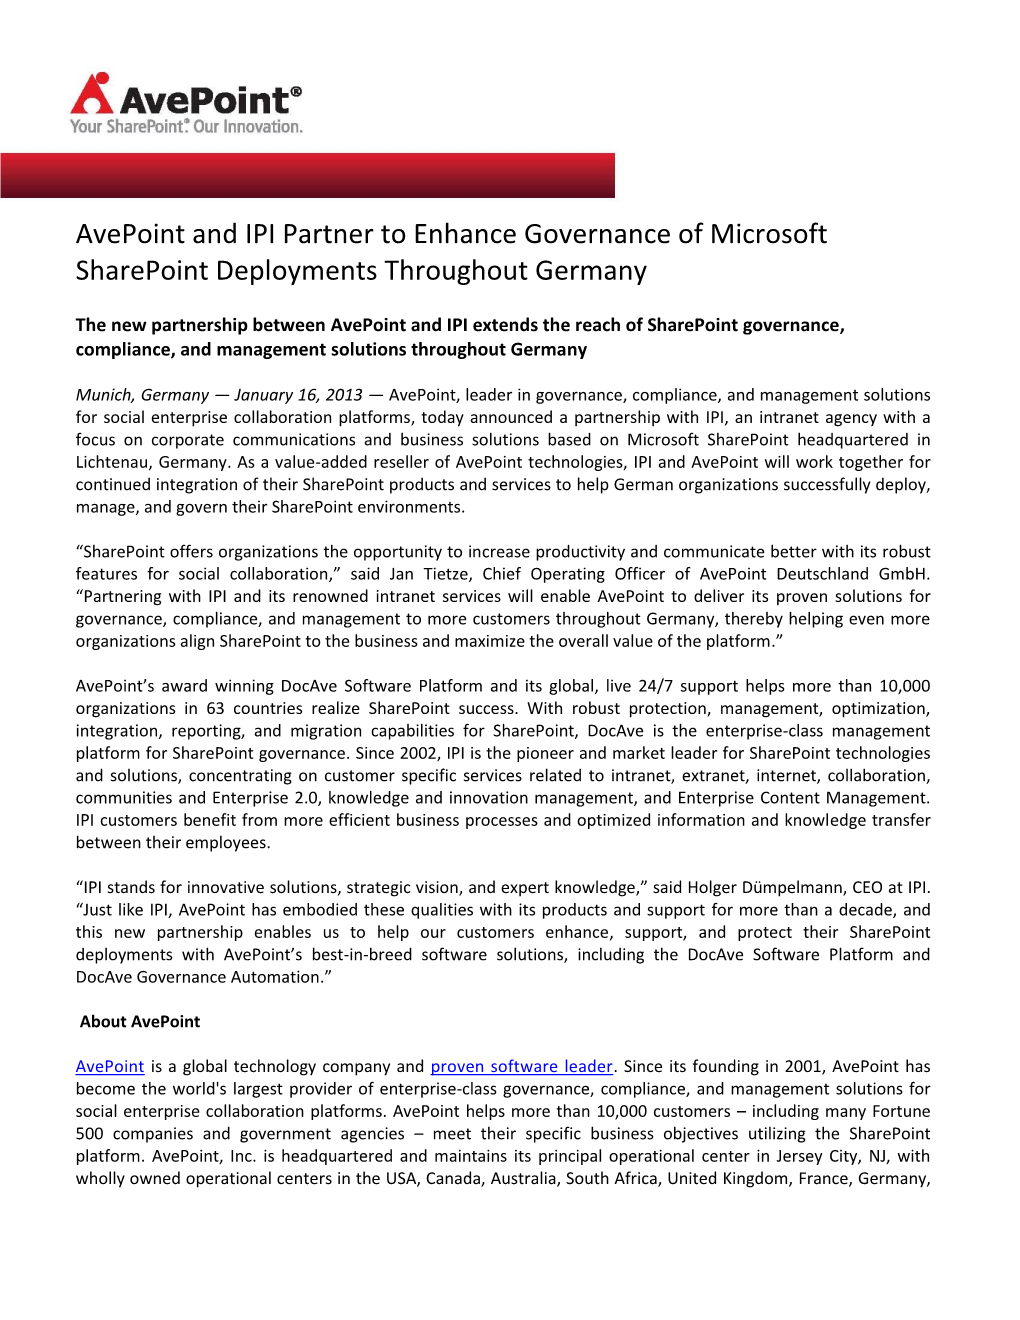 Avepoint and IPI Partner to Enhance Governance of Microsoft Sharepoint Deployments Throughout Germany